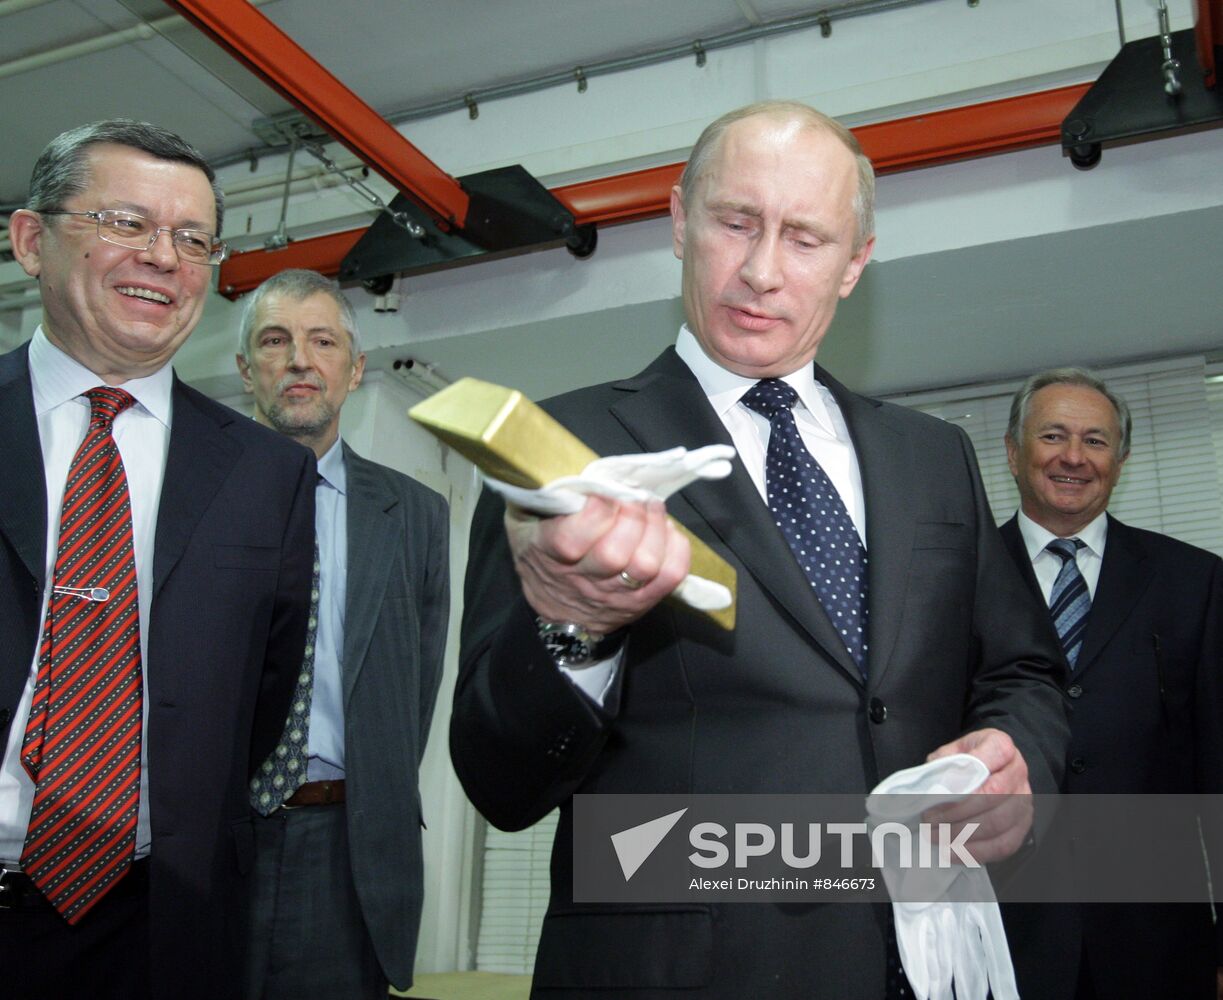 Vladimir Putin visits Central Depository of Bank of Russia